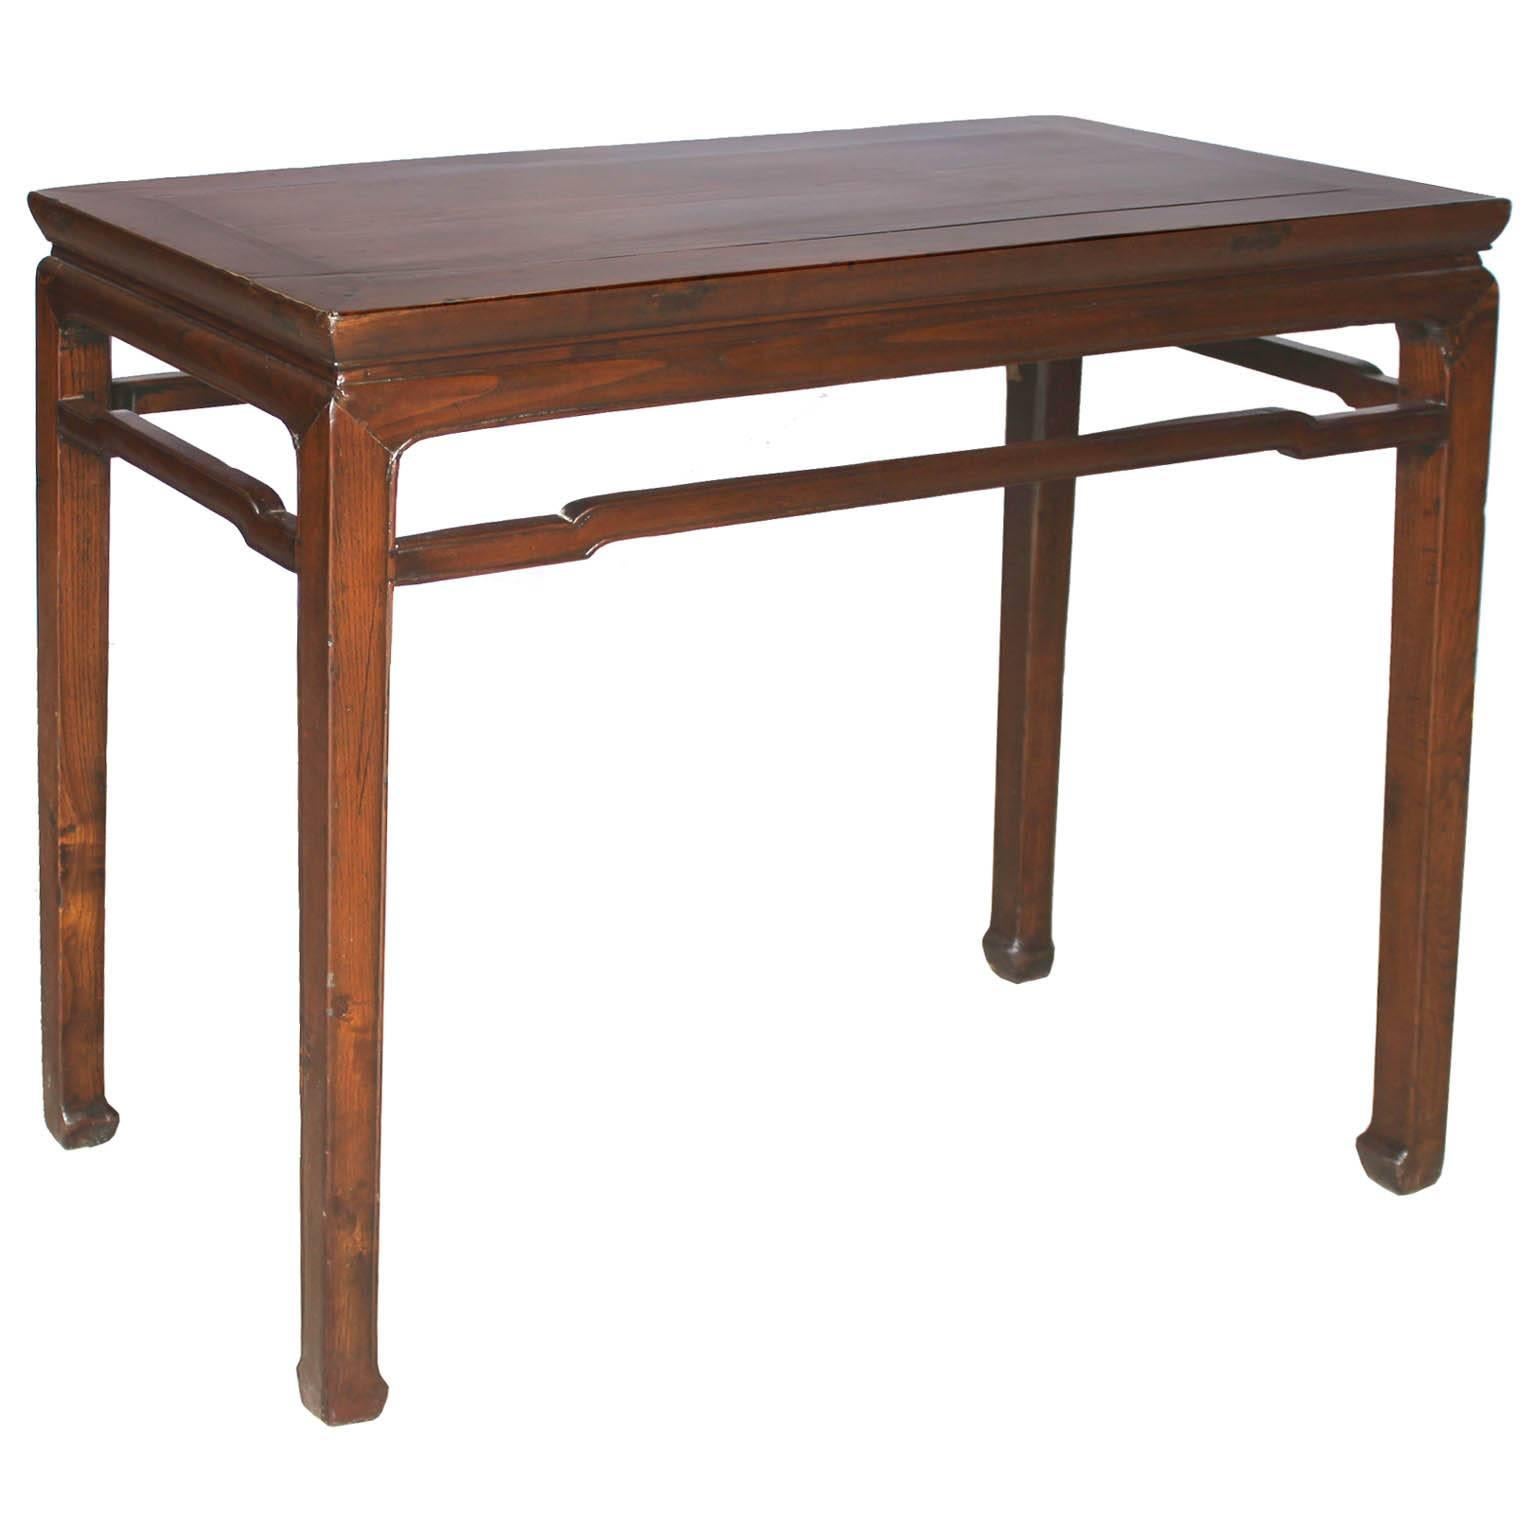 Classic console table with beautiful wood grain, support bars and horse hoof-style feet would make an elegant statement as an entryway table with a lamp and accessories on top.